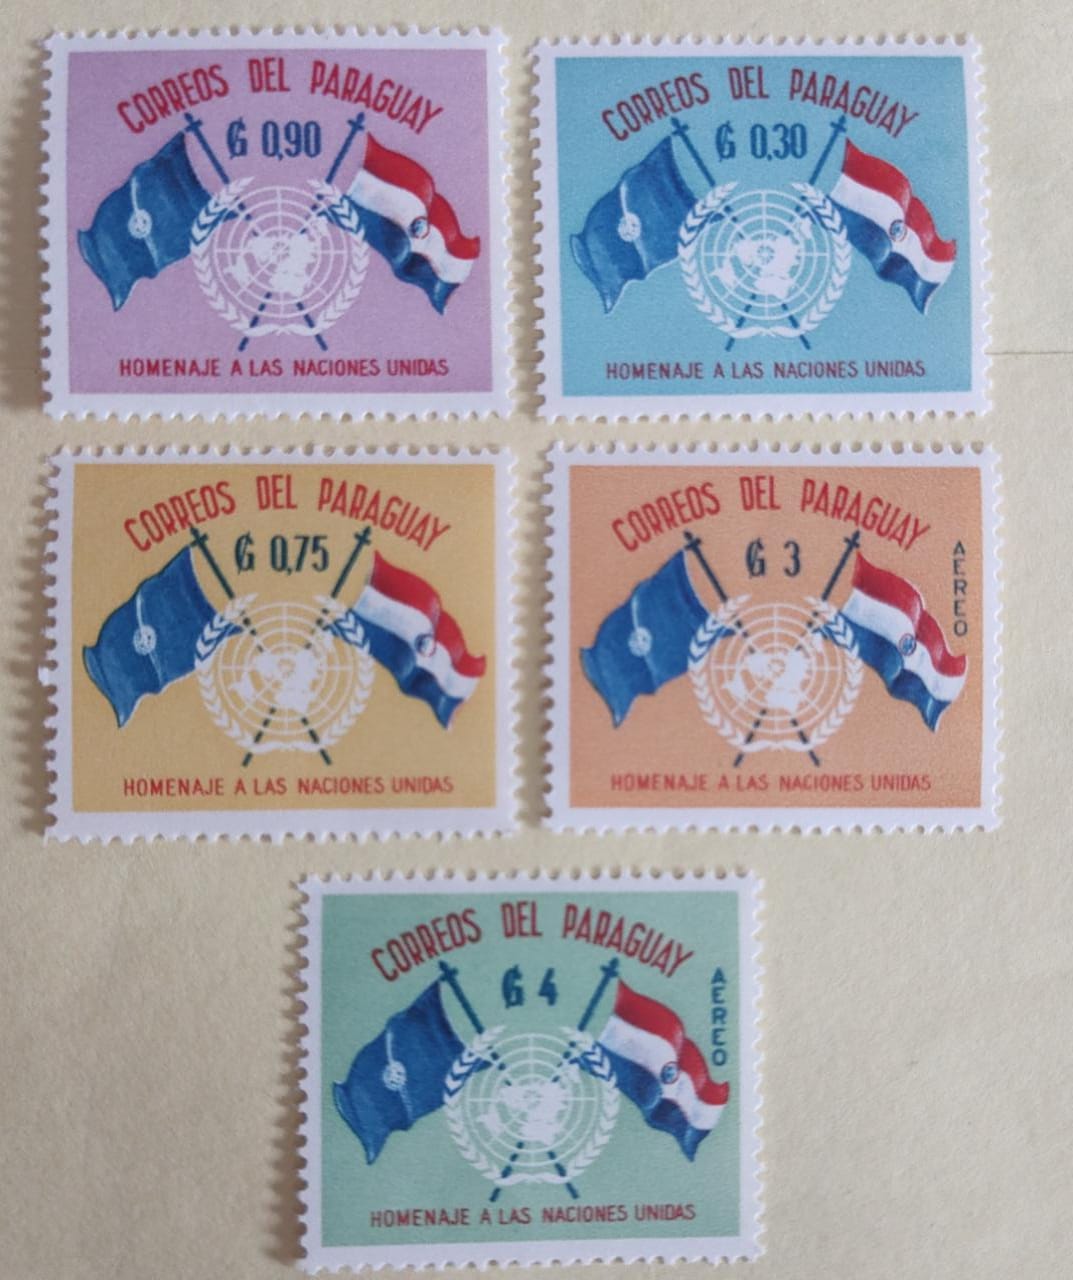 5 v mint set of Paraguay stamps on United Nations and flags theme .